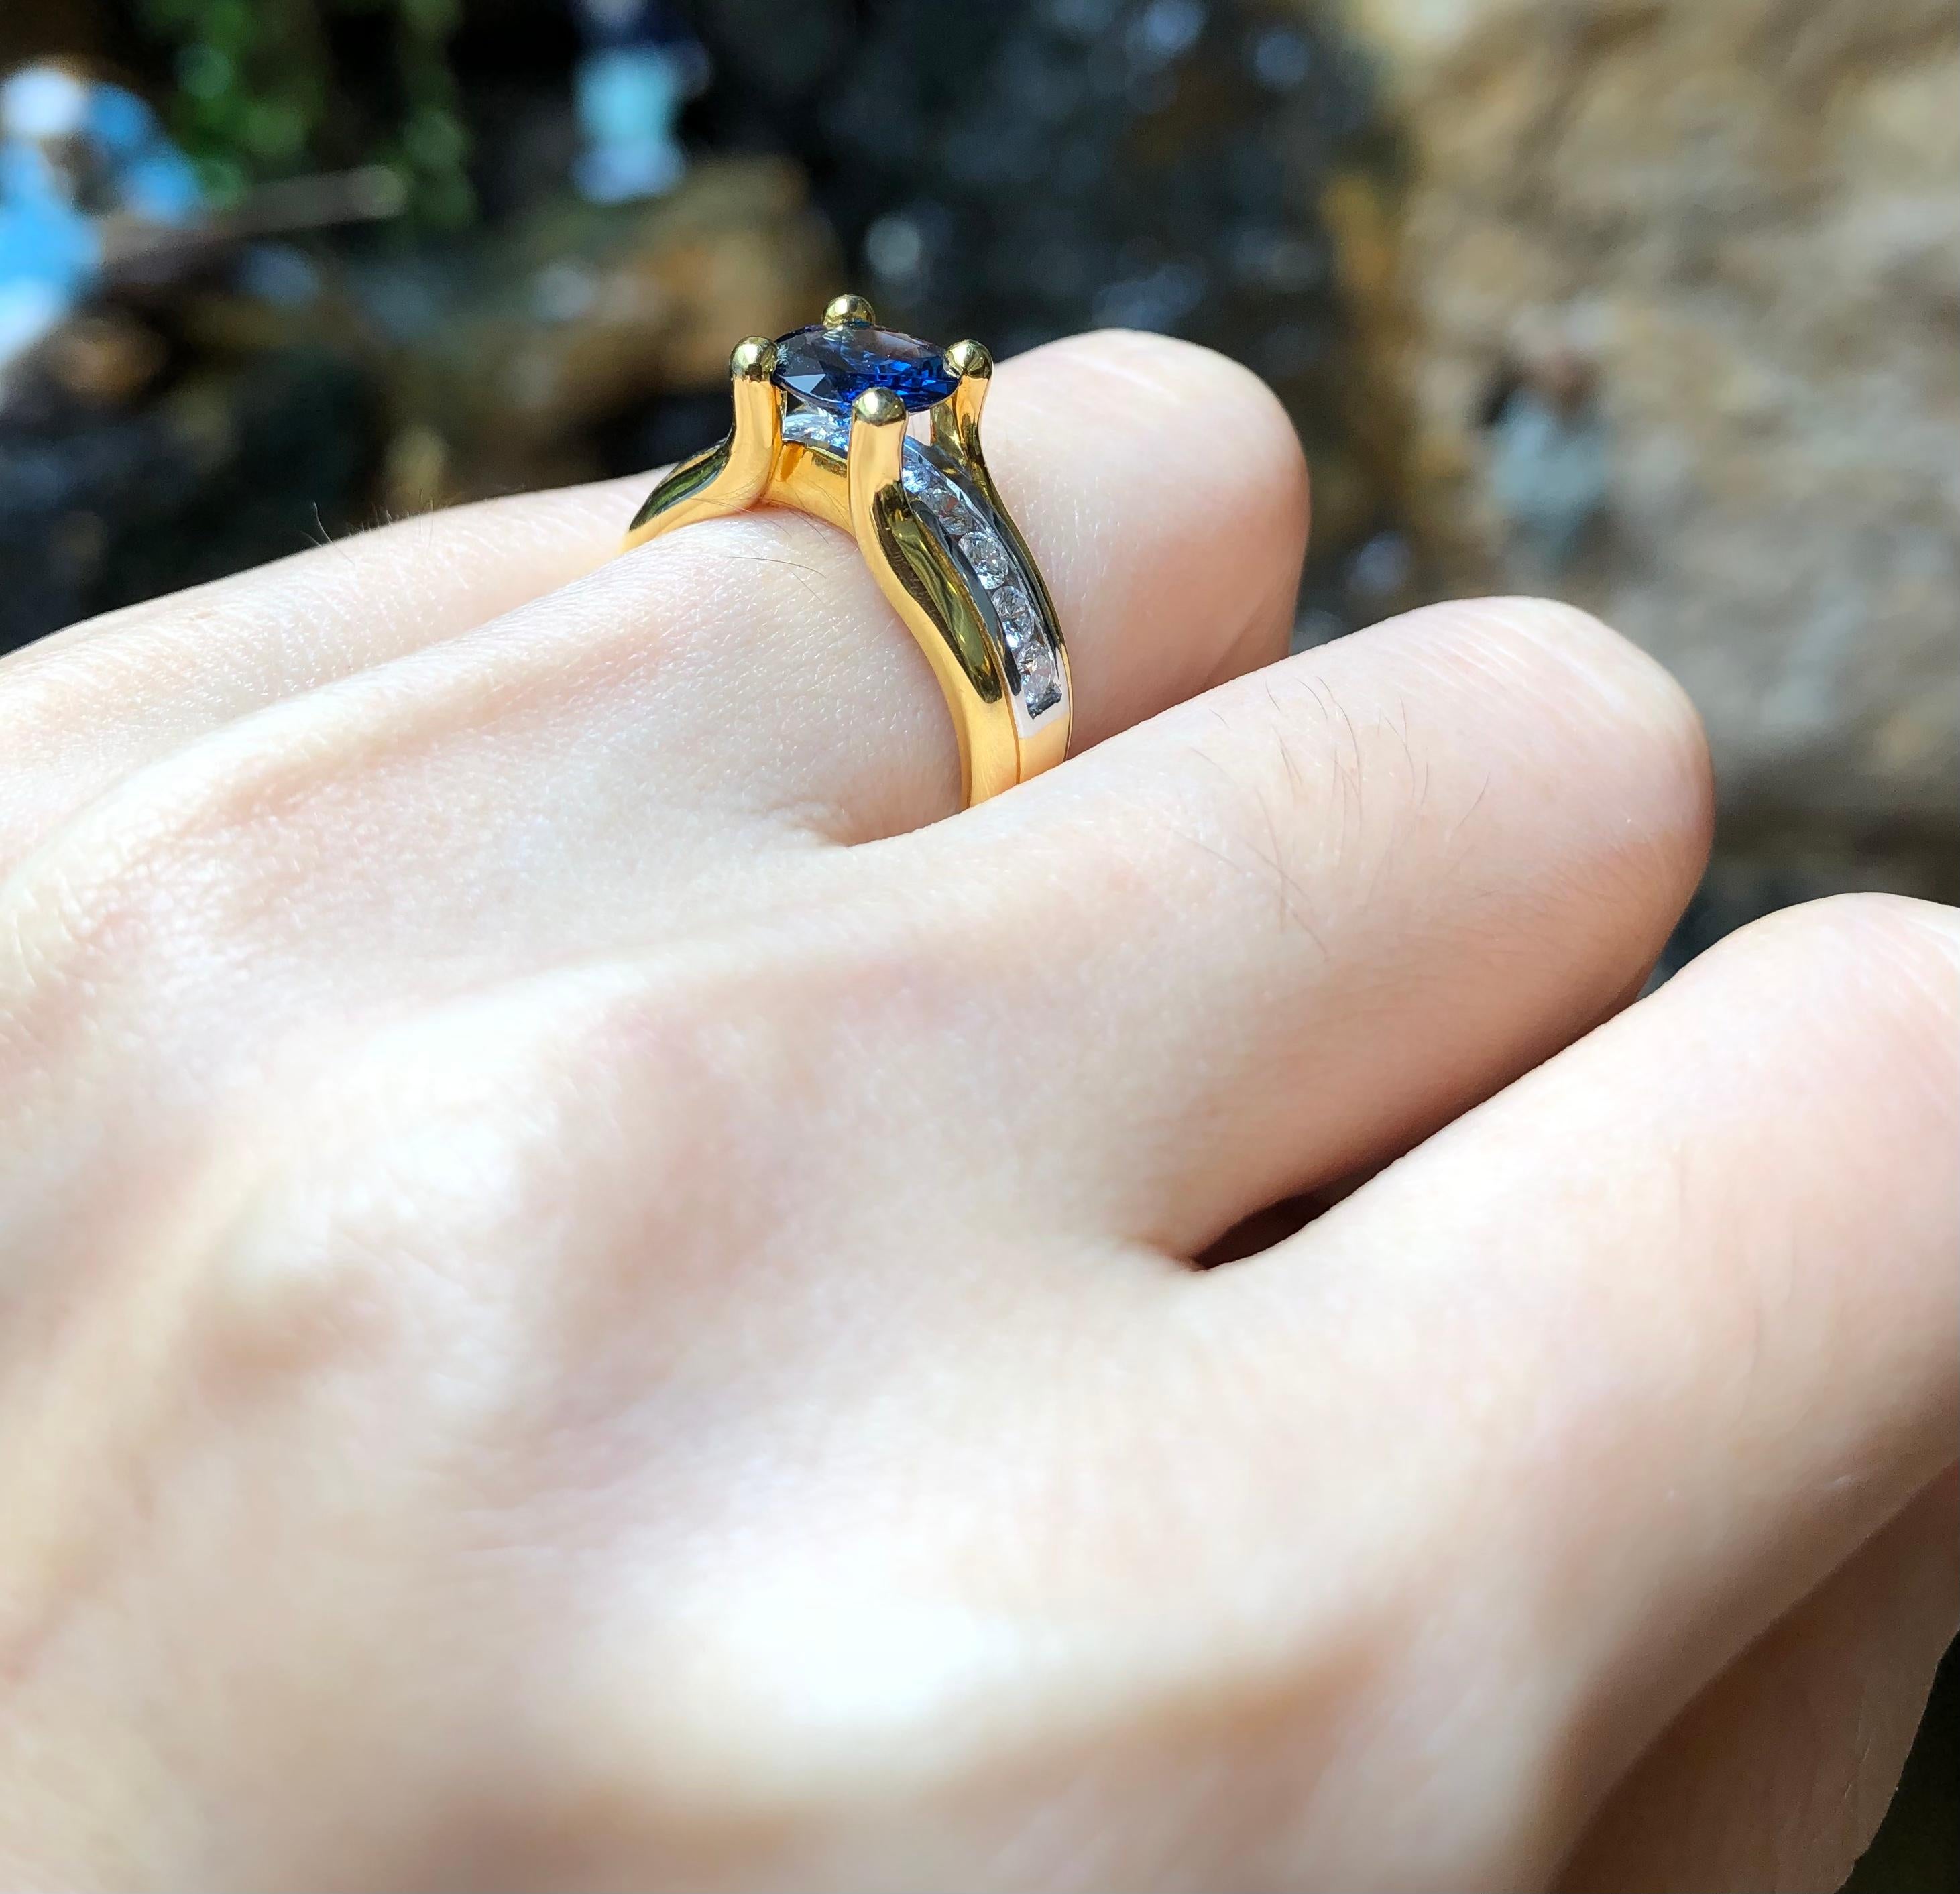 Blue Sapphire 1.25 carats with Diamond 0.51 carat Ring set in 18 Karat Gold Settings

Width:  0.7 cm 
Length: 0.7 cm
Ring Size: 51
Total Weight: 7.68 grams

